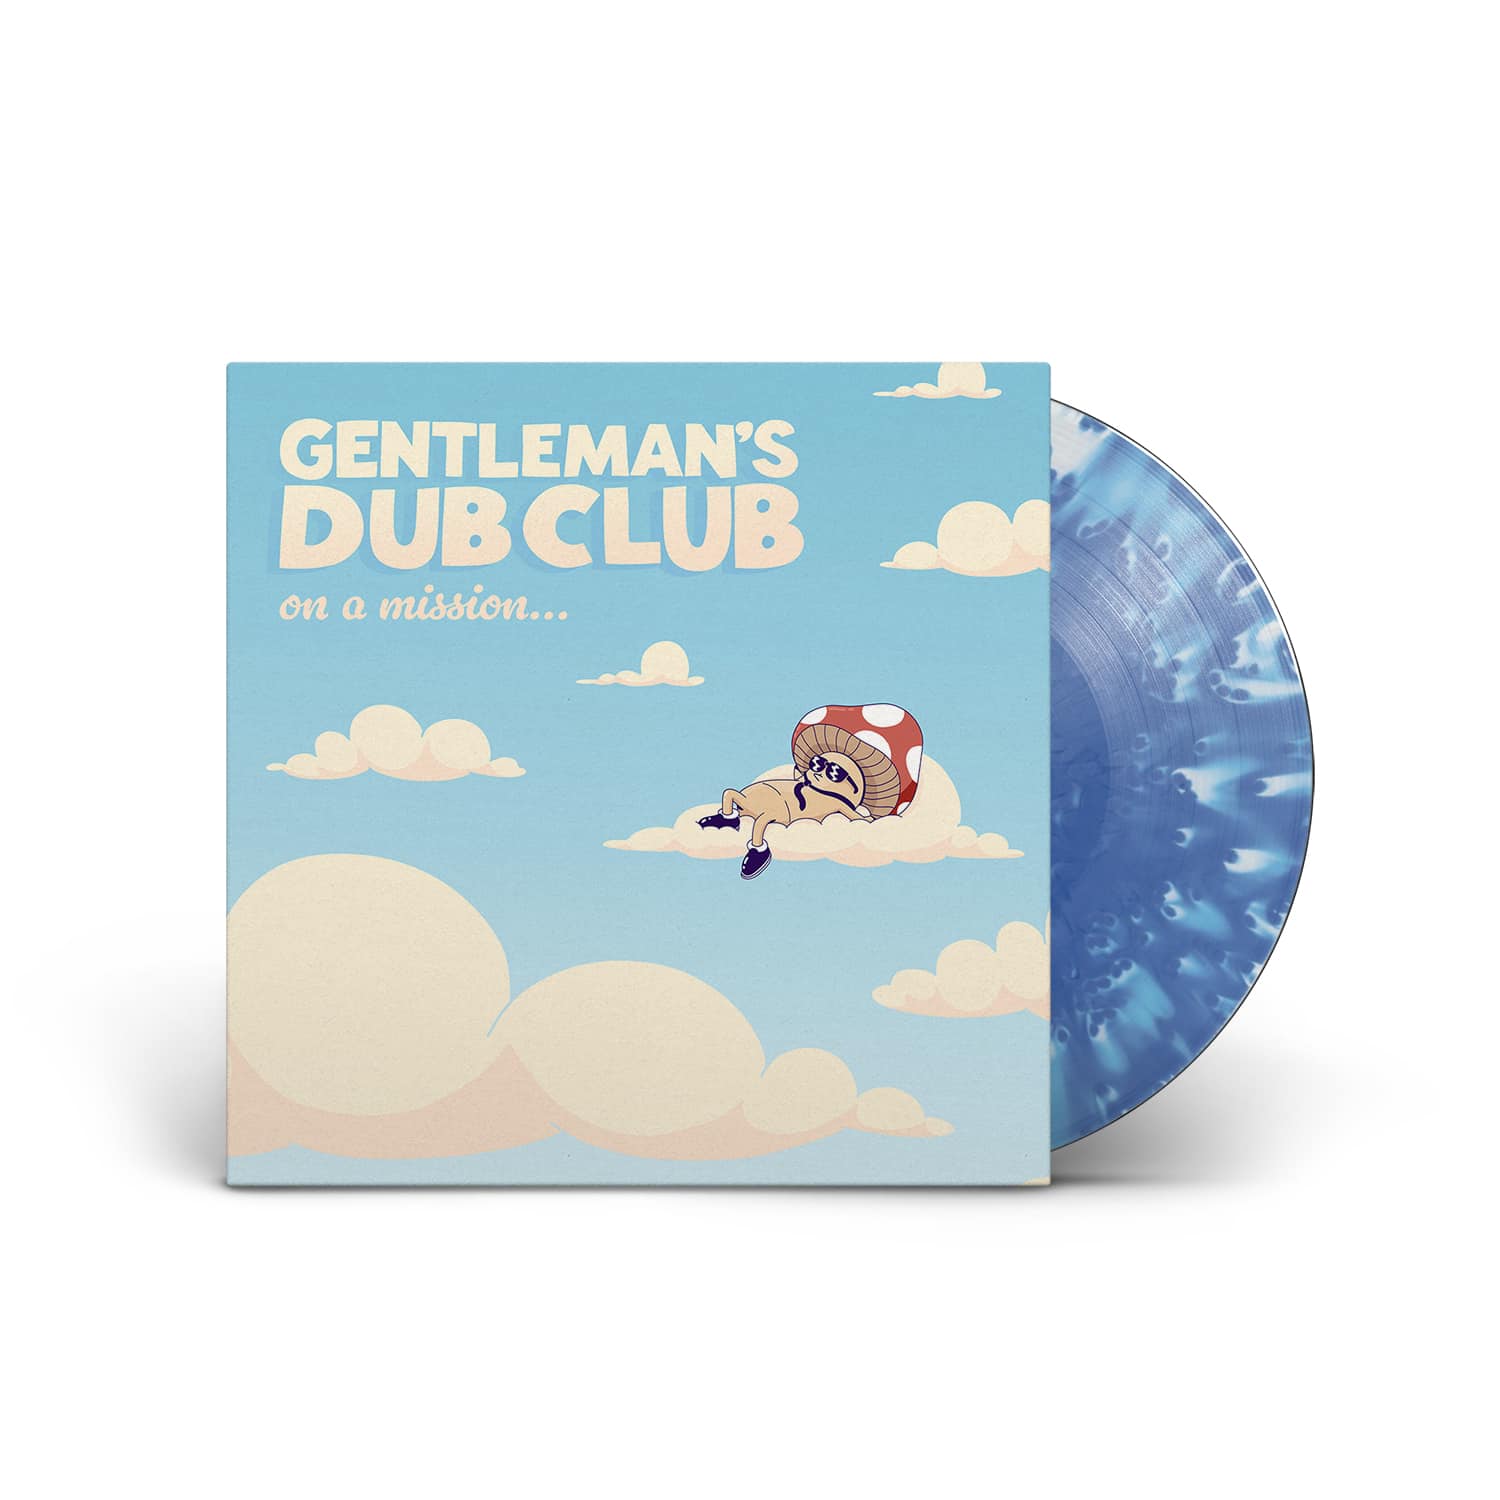 Gentleman's Dub Club Releases "On a Mission"